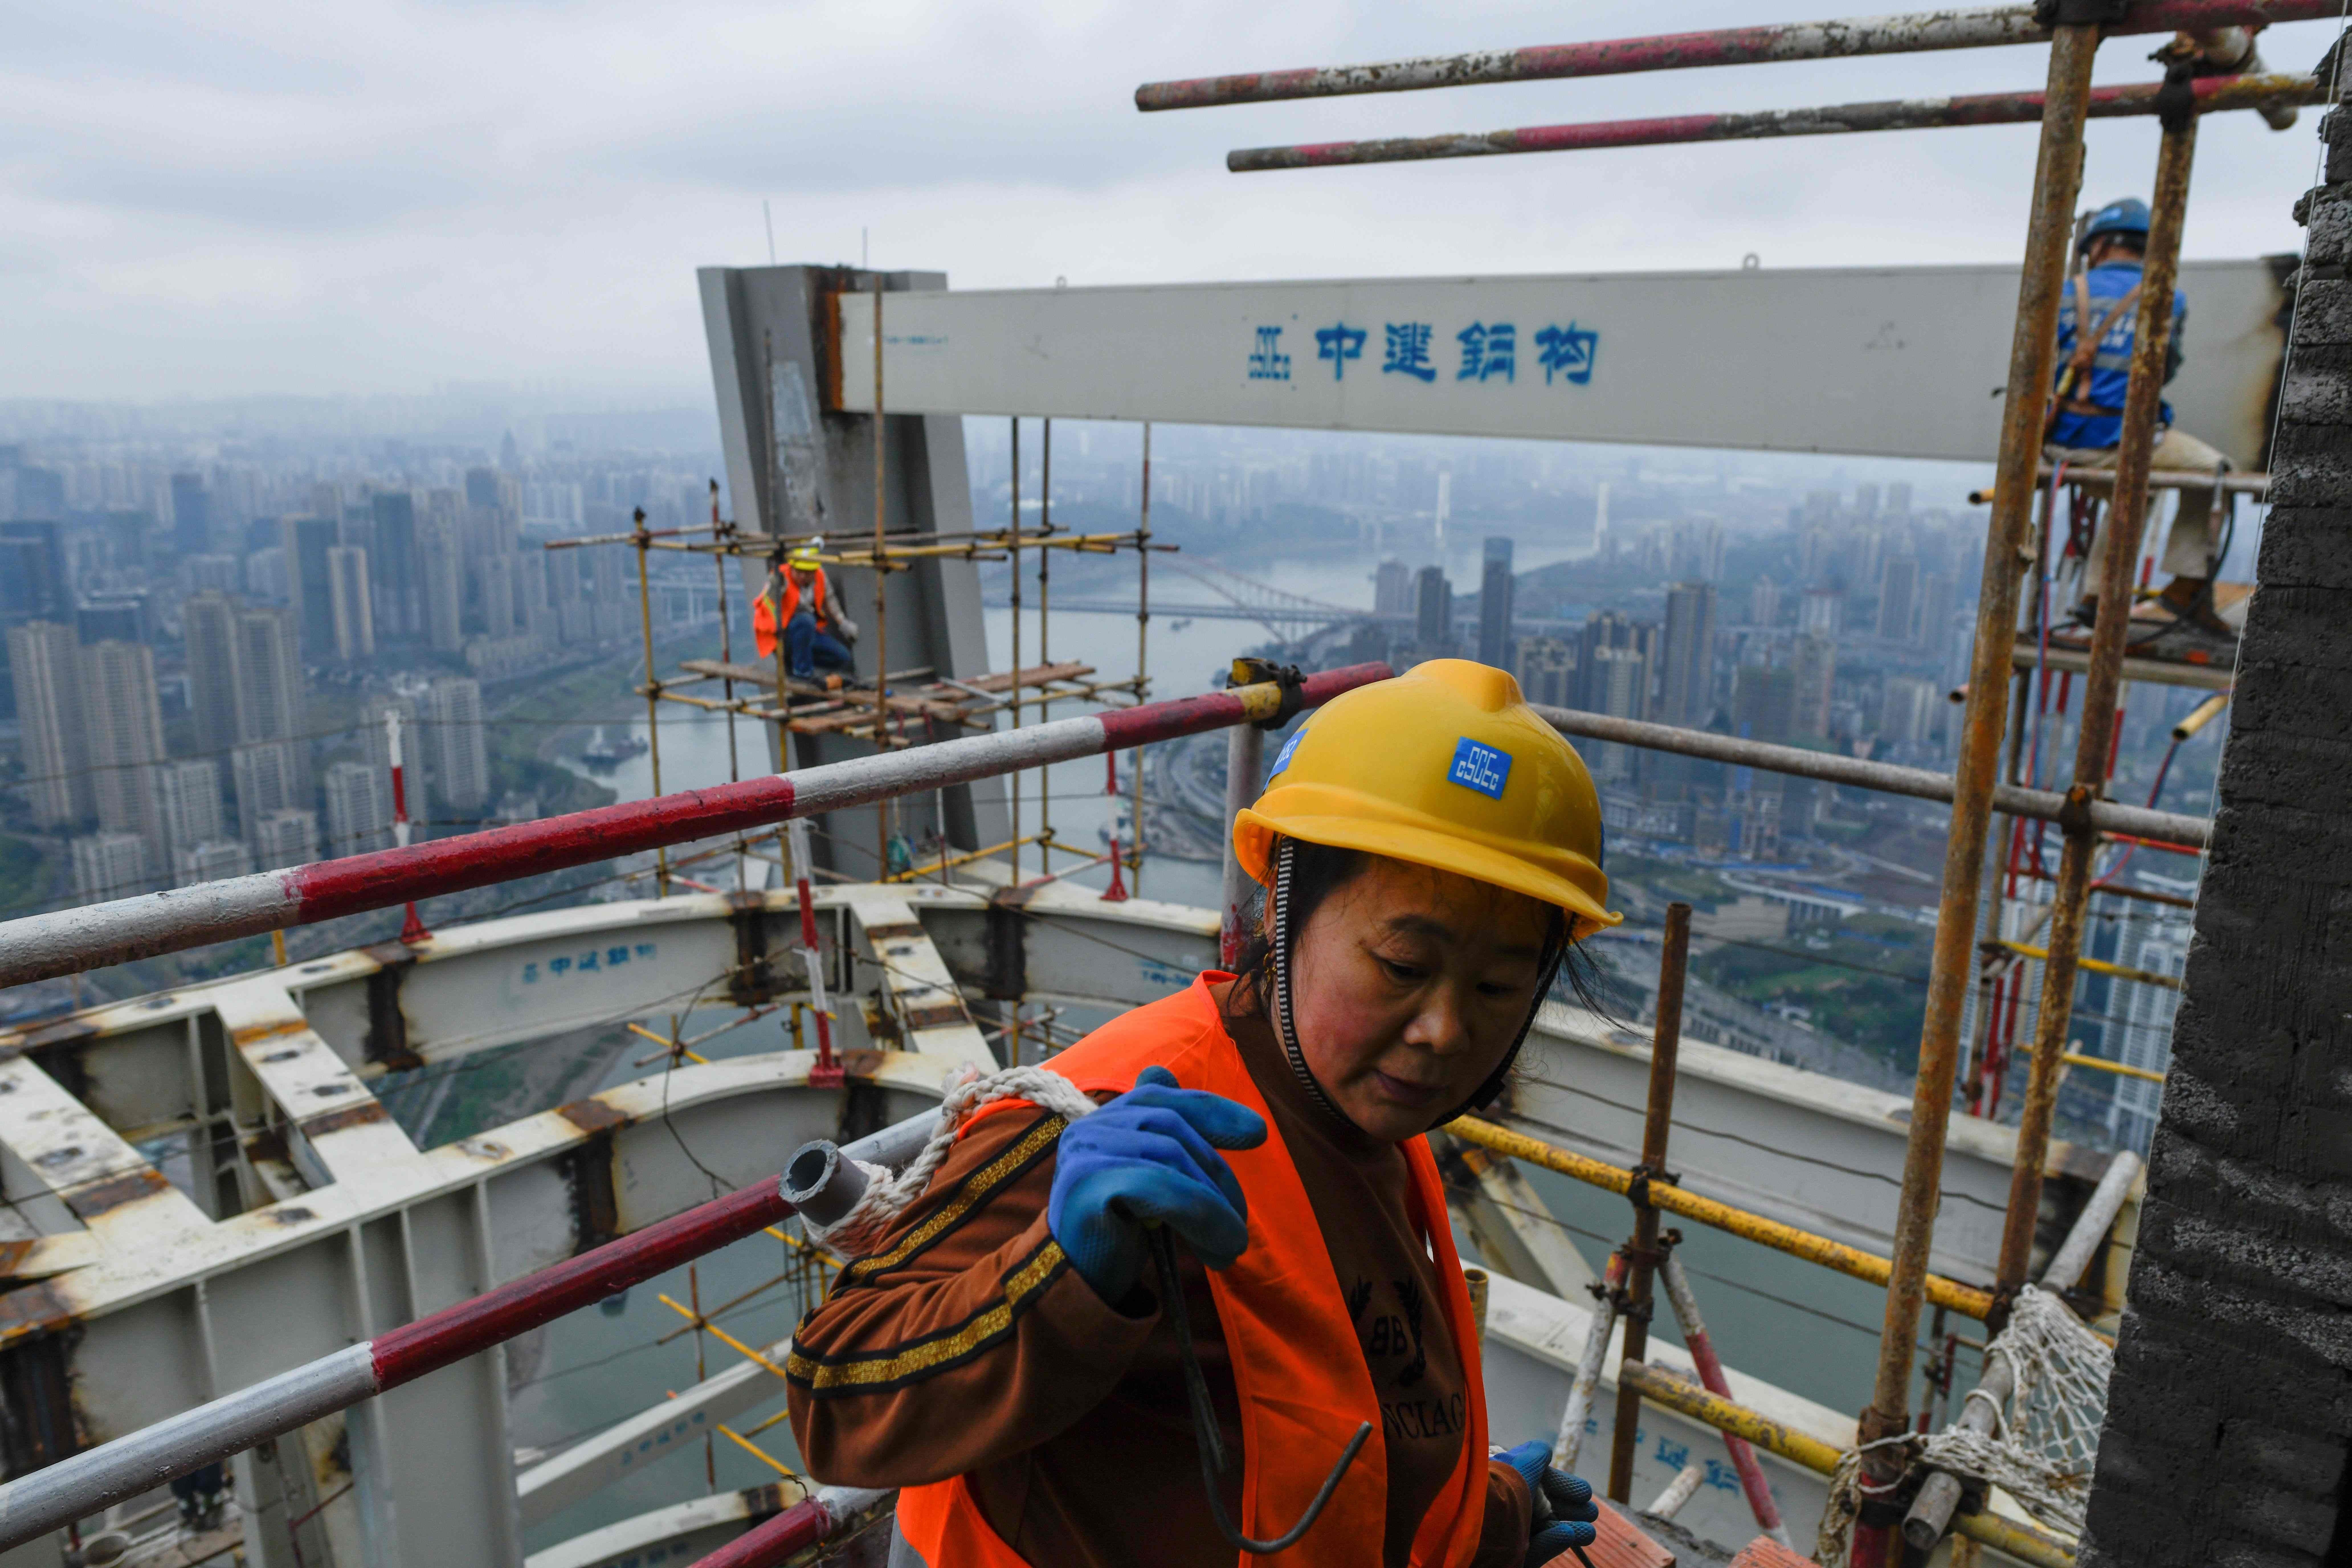 Construction workers in Chongqing, China, on March 22. The fate of China’s economic war with the US depends less on the trade deals negotiated and more on whether China can prevent a property market collapse. Photo: AFP